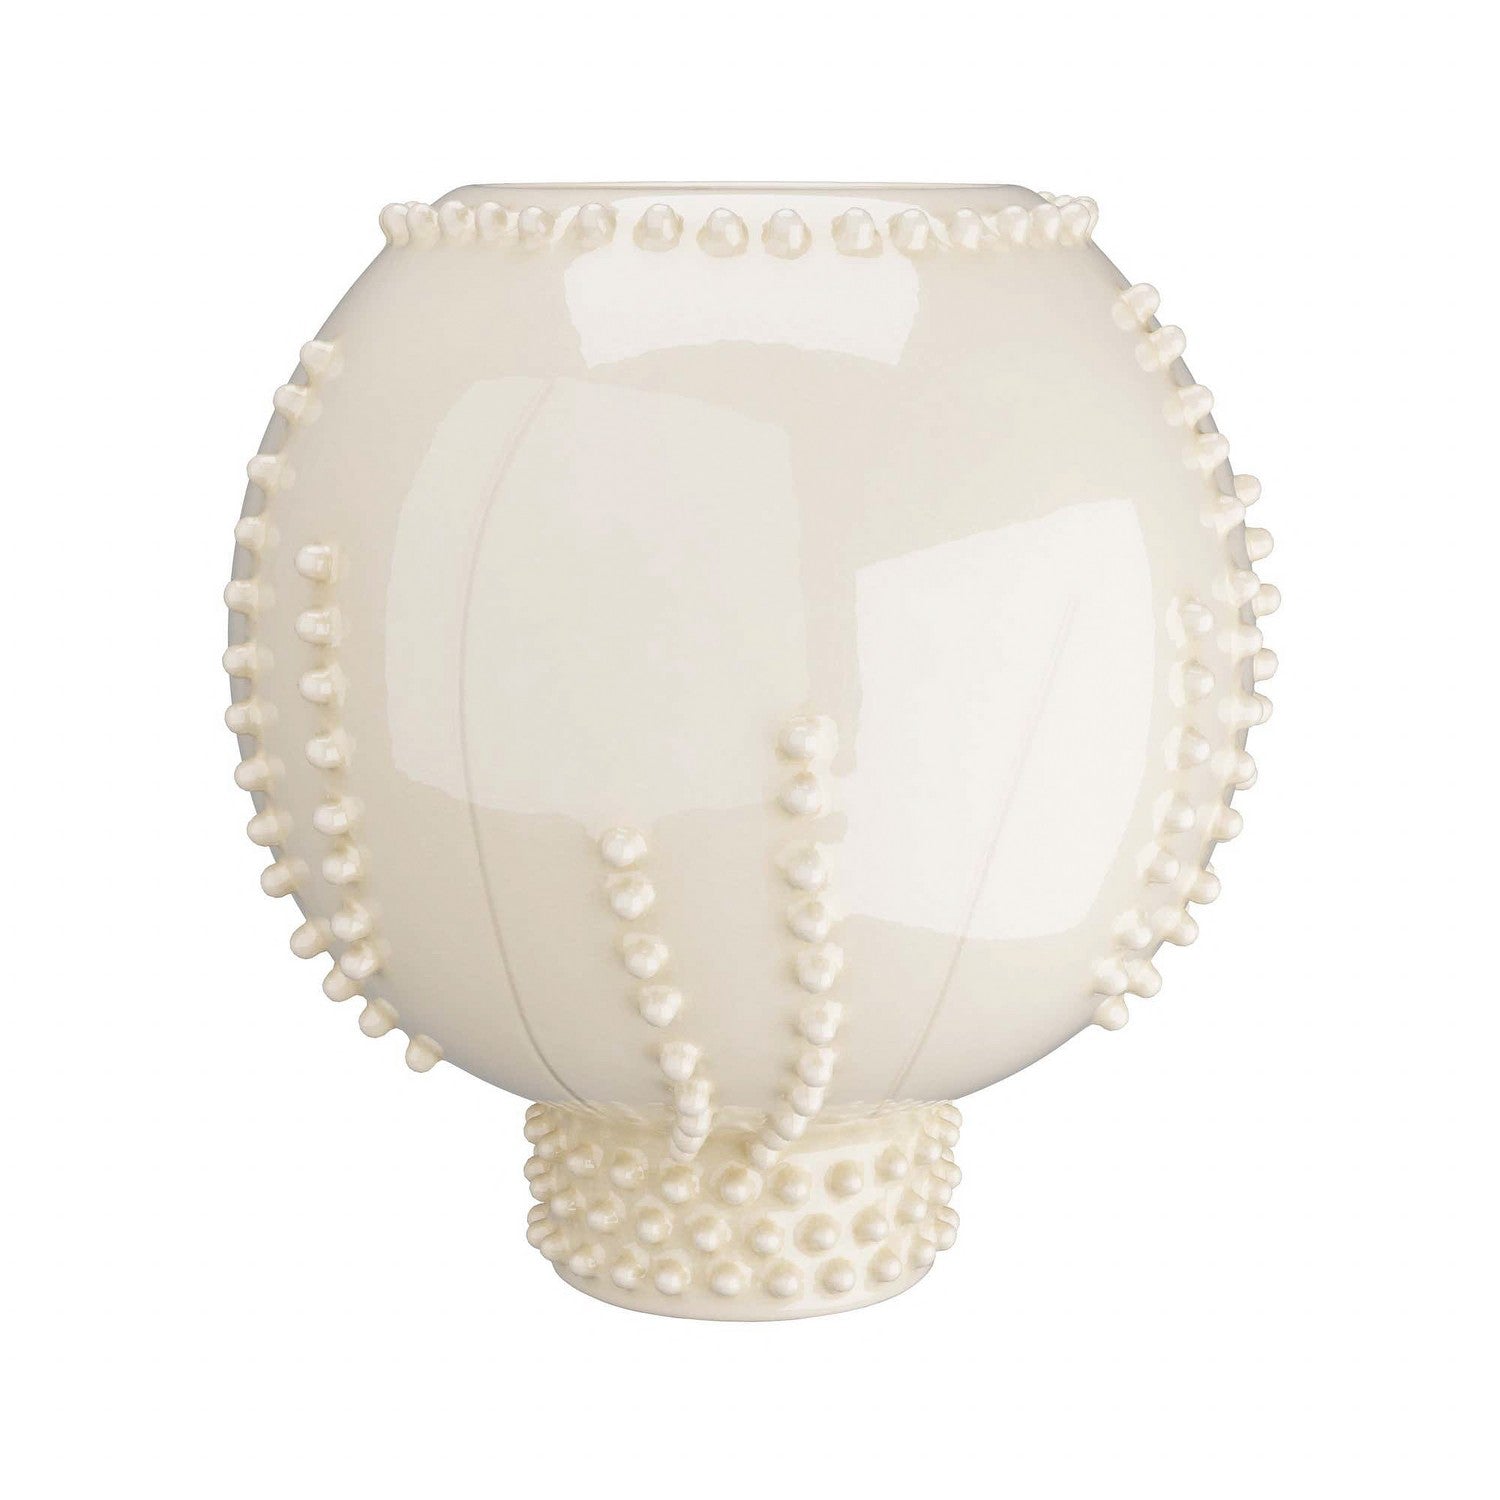 Vase from the Spitzy collection in Ivory finish